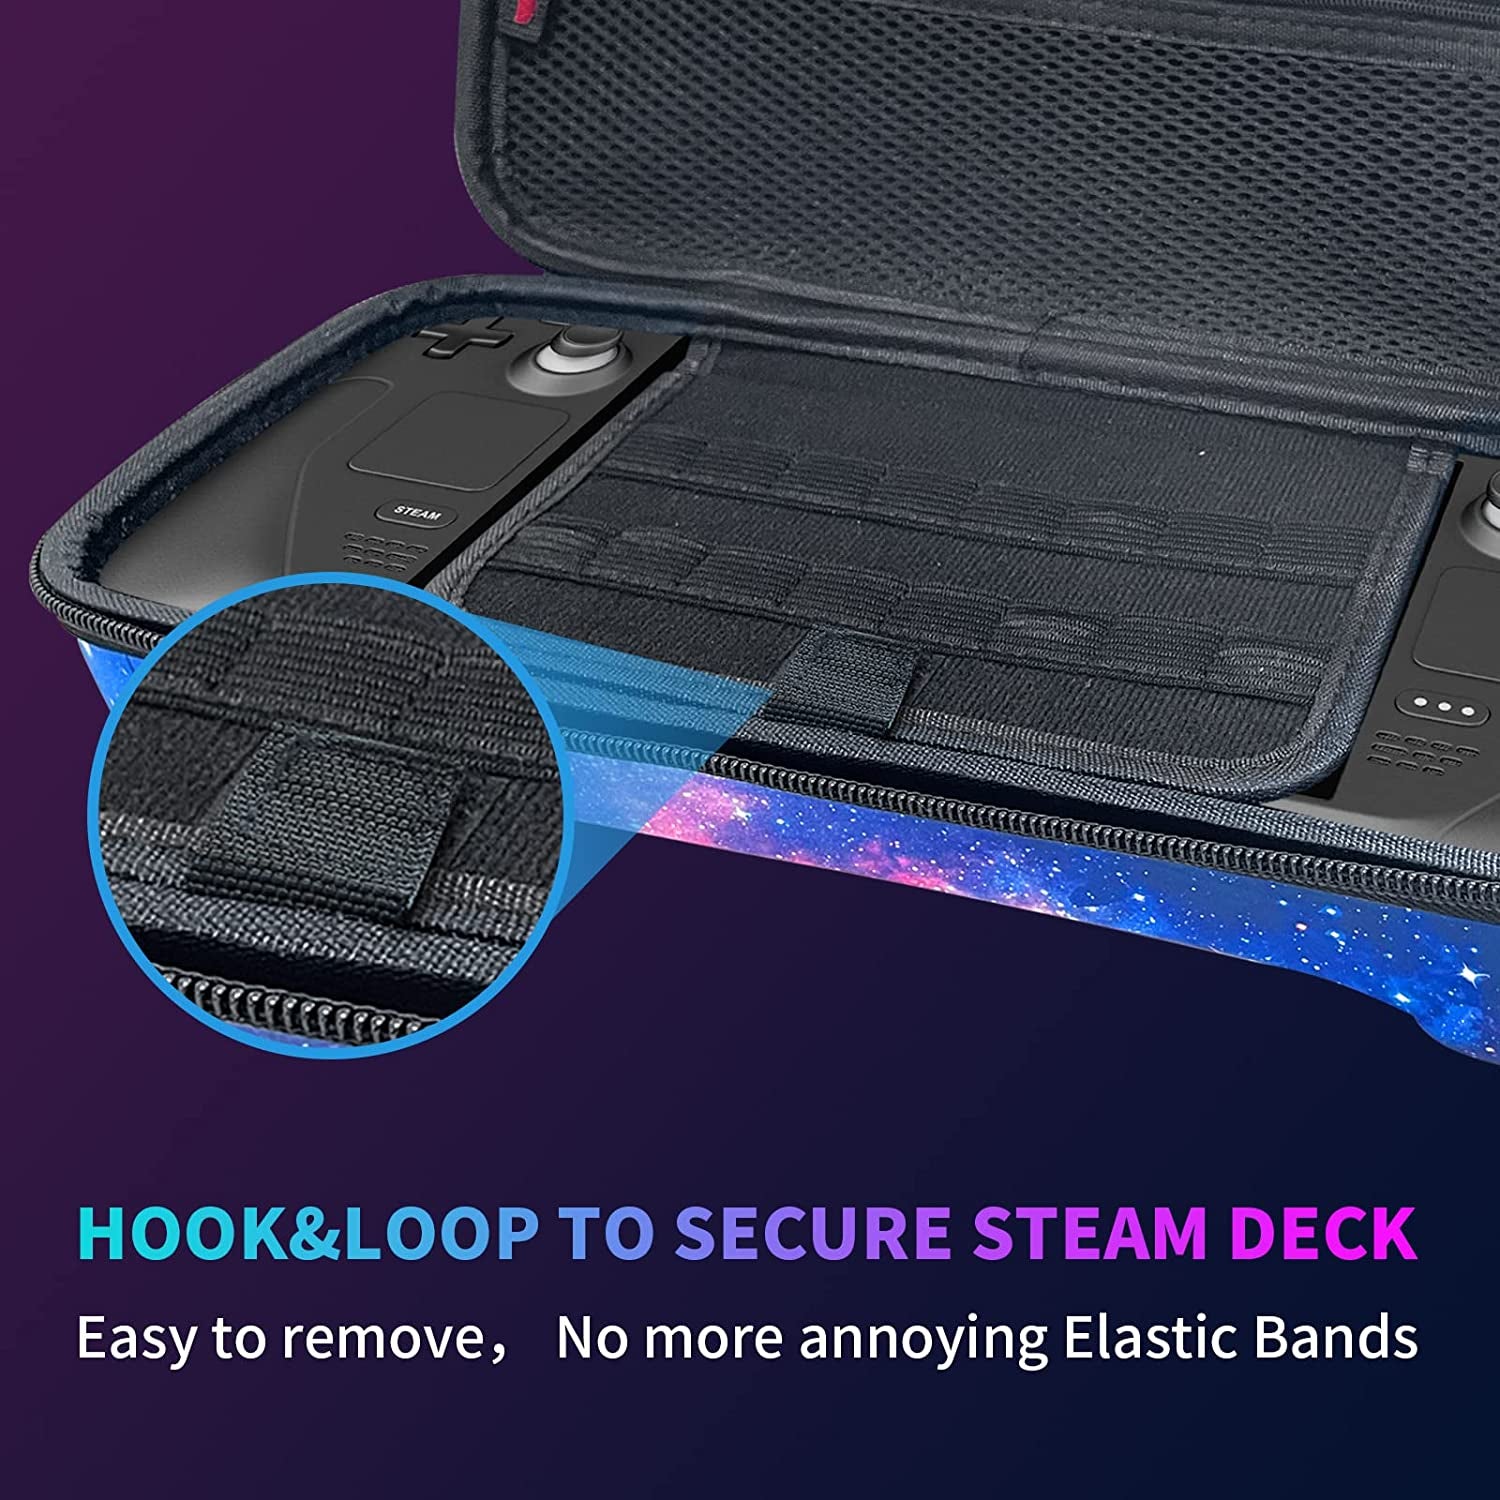 Galaxy Carrying Case Compatible with Steam Deck, Protective Hard Shell Carry Case Built-In AC Adapter Charger Storage, Portable Hard Storage Case with 16 Game Card Slots for Steam Deck Console & Accessories